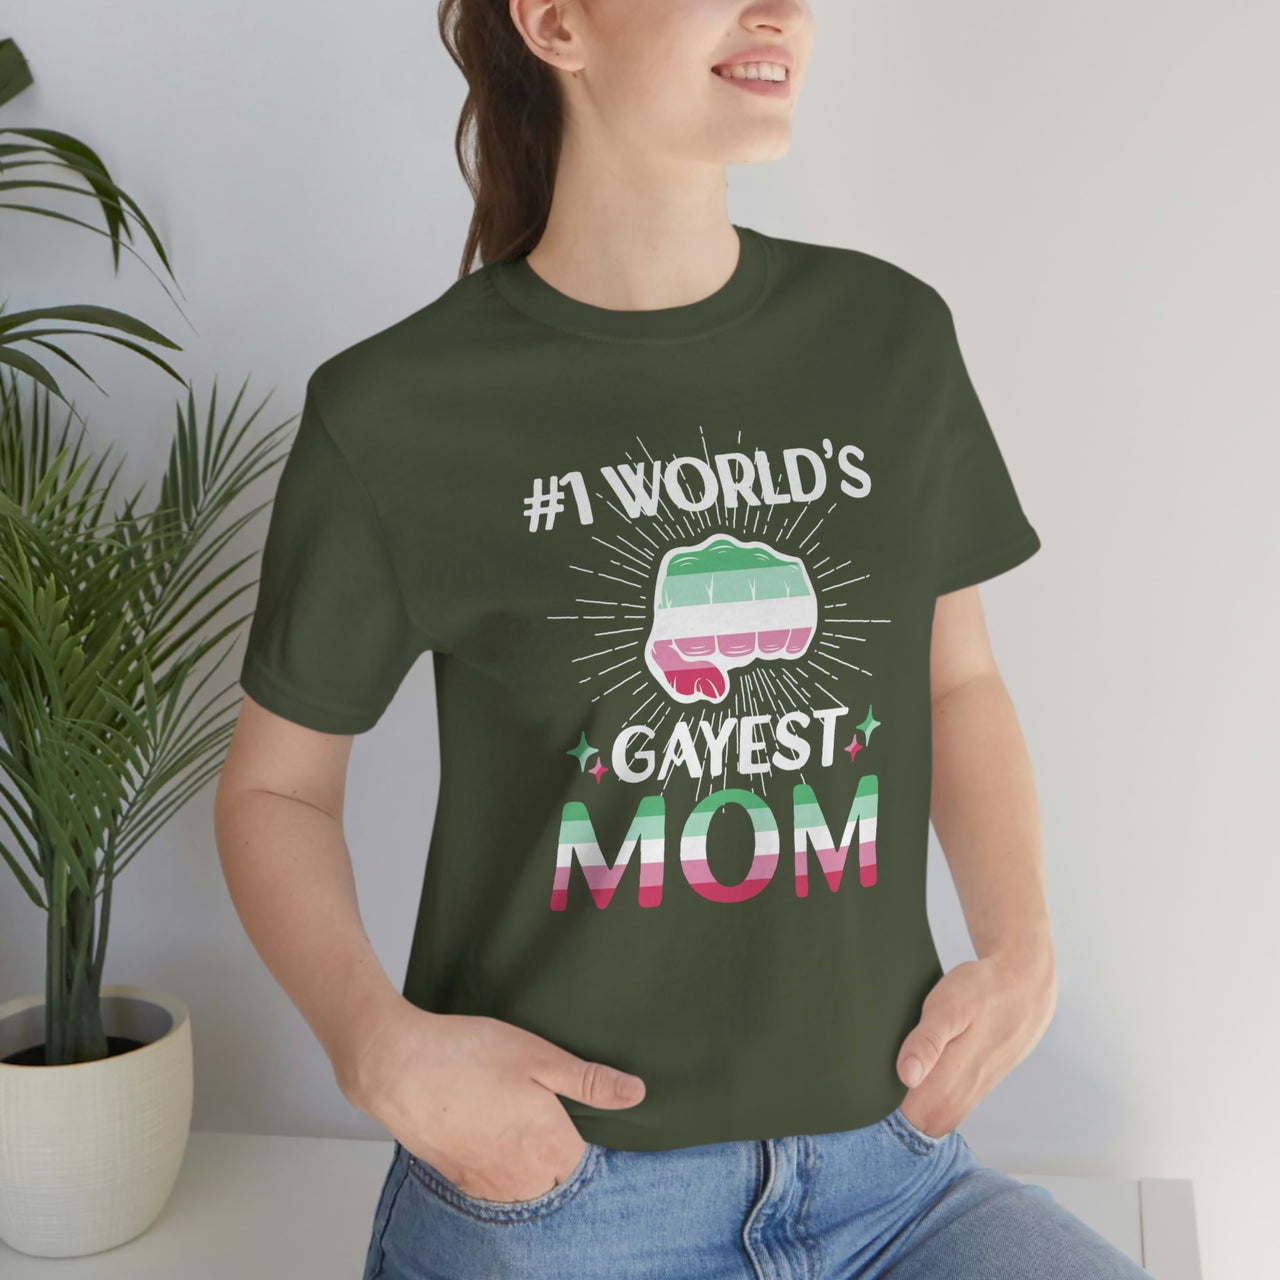 Abrosexual Pride Flag Mother's Day Unisex Short Sleeve Tee - #1 World's Gayest Mom SHAVA CO